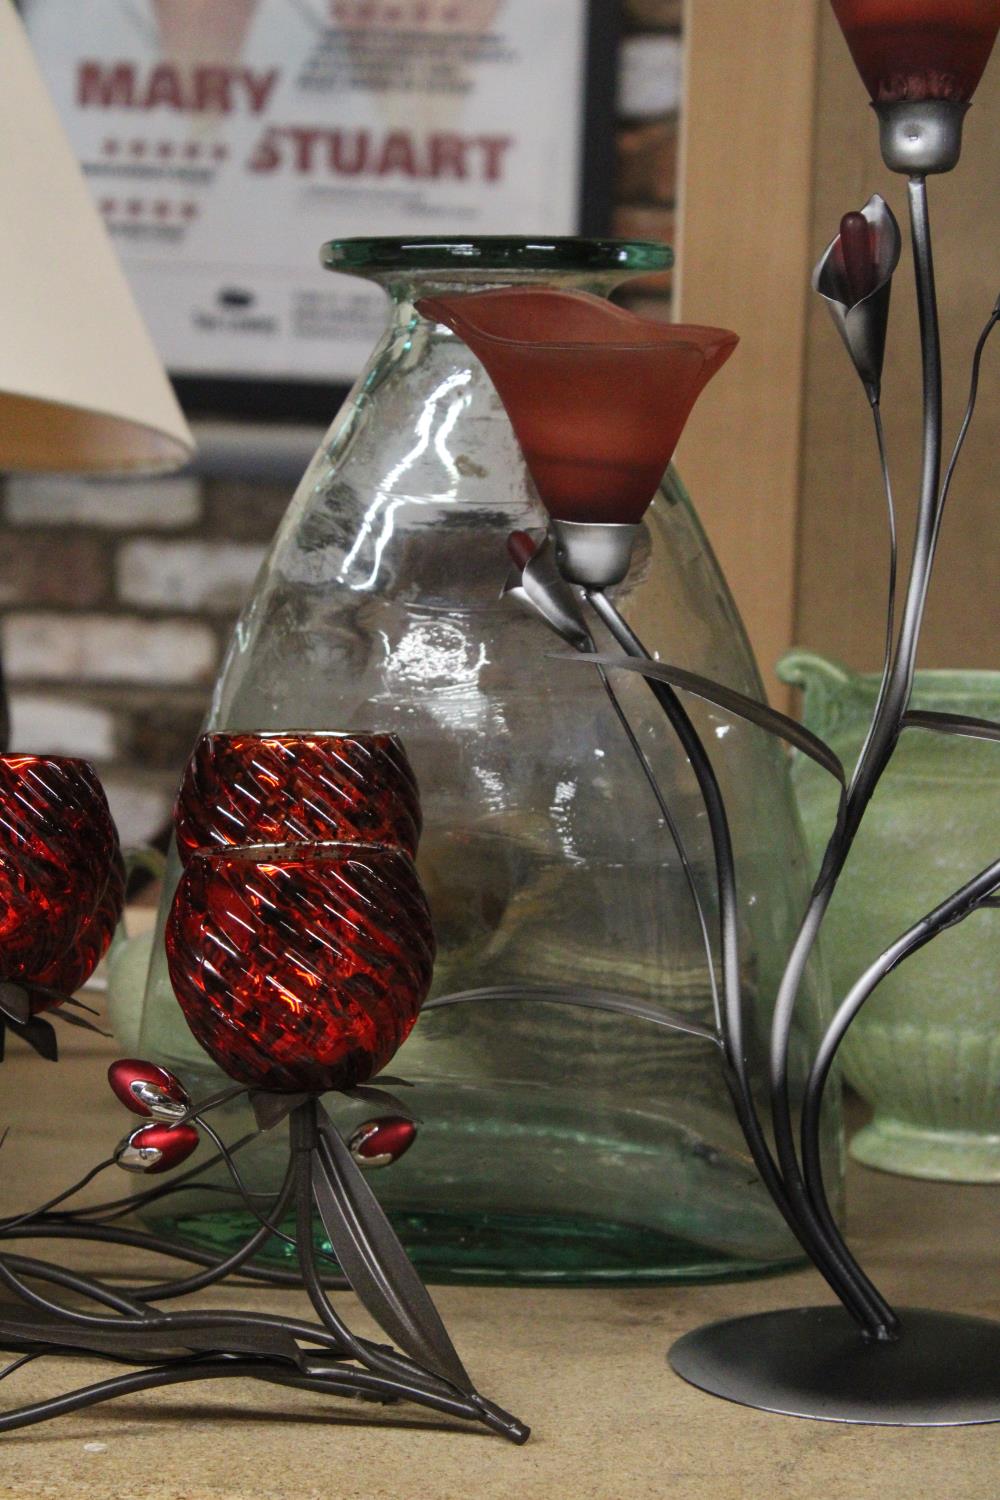 A THREE MODERN GLASS FLOWER DESIGN METAL CANDLE HOLDERS PLUS LARGE GLASS VASE - Image 4 of 4